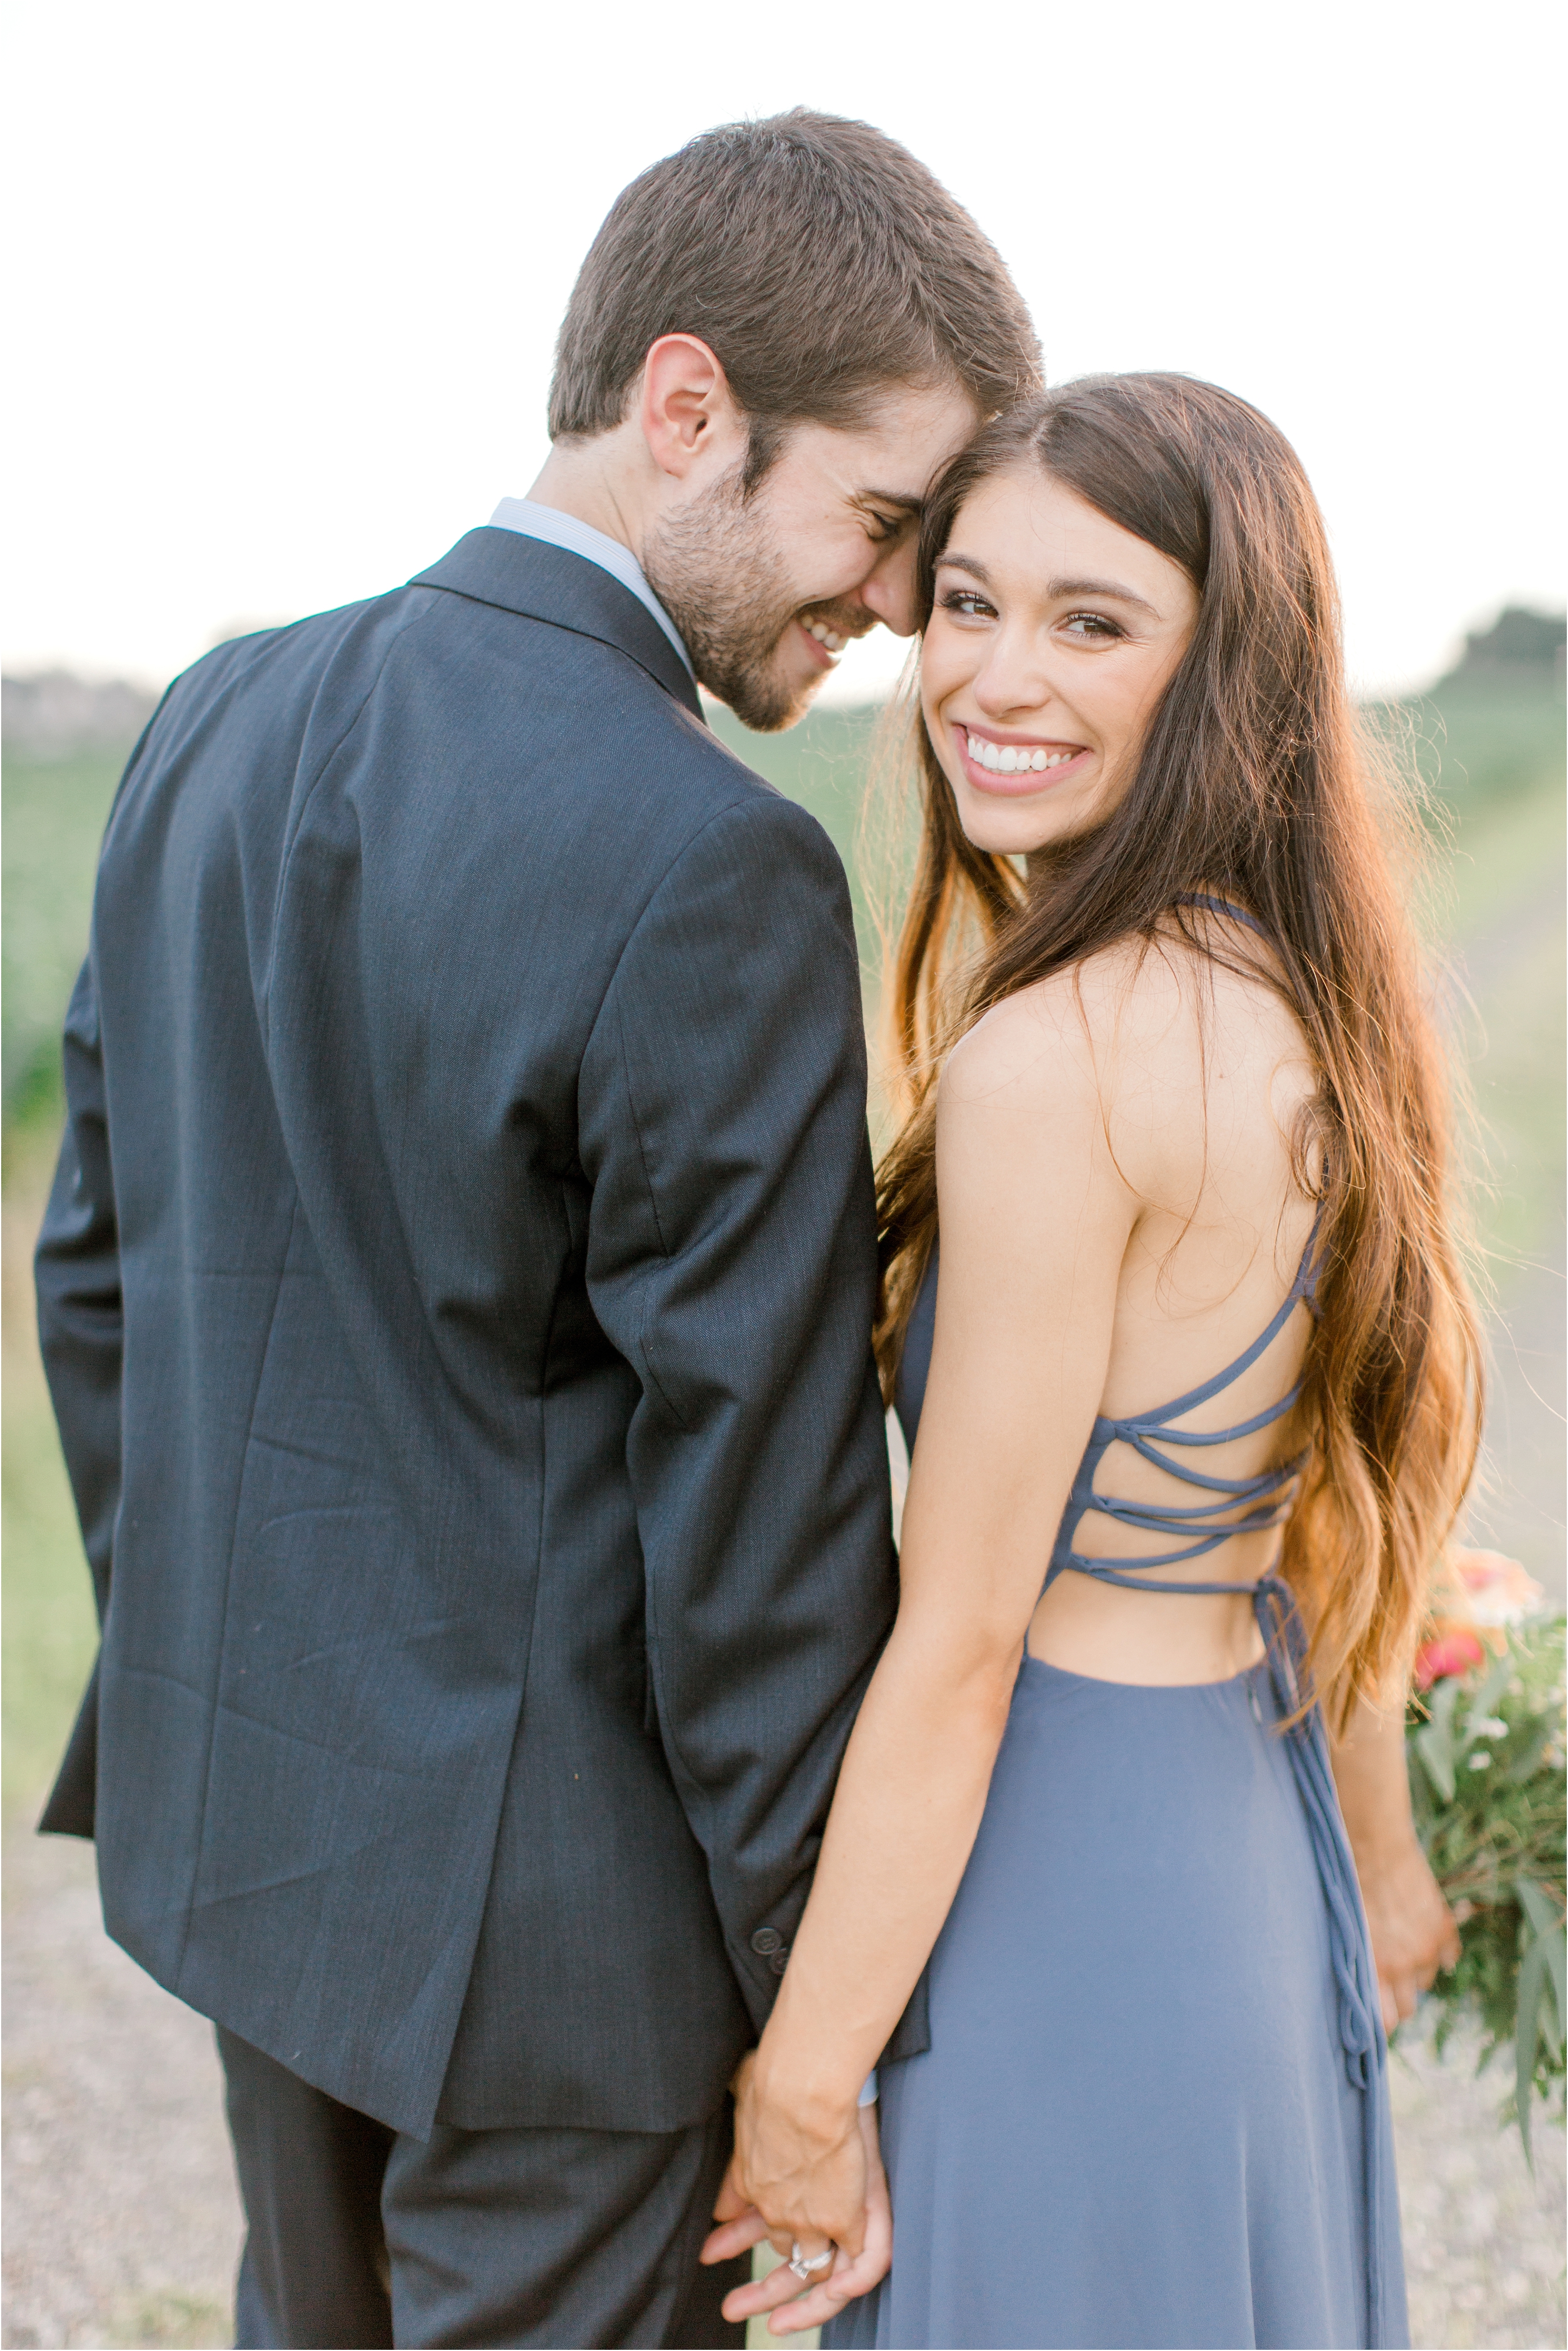 romantic blue dress at whimsical field engagement session